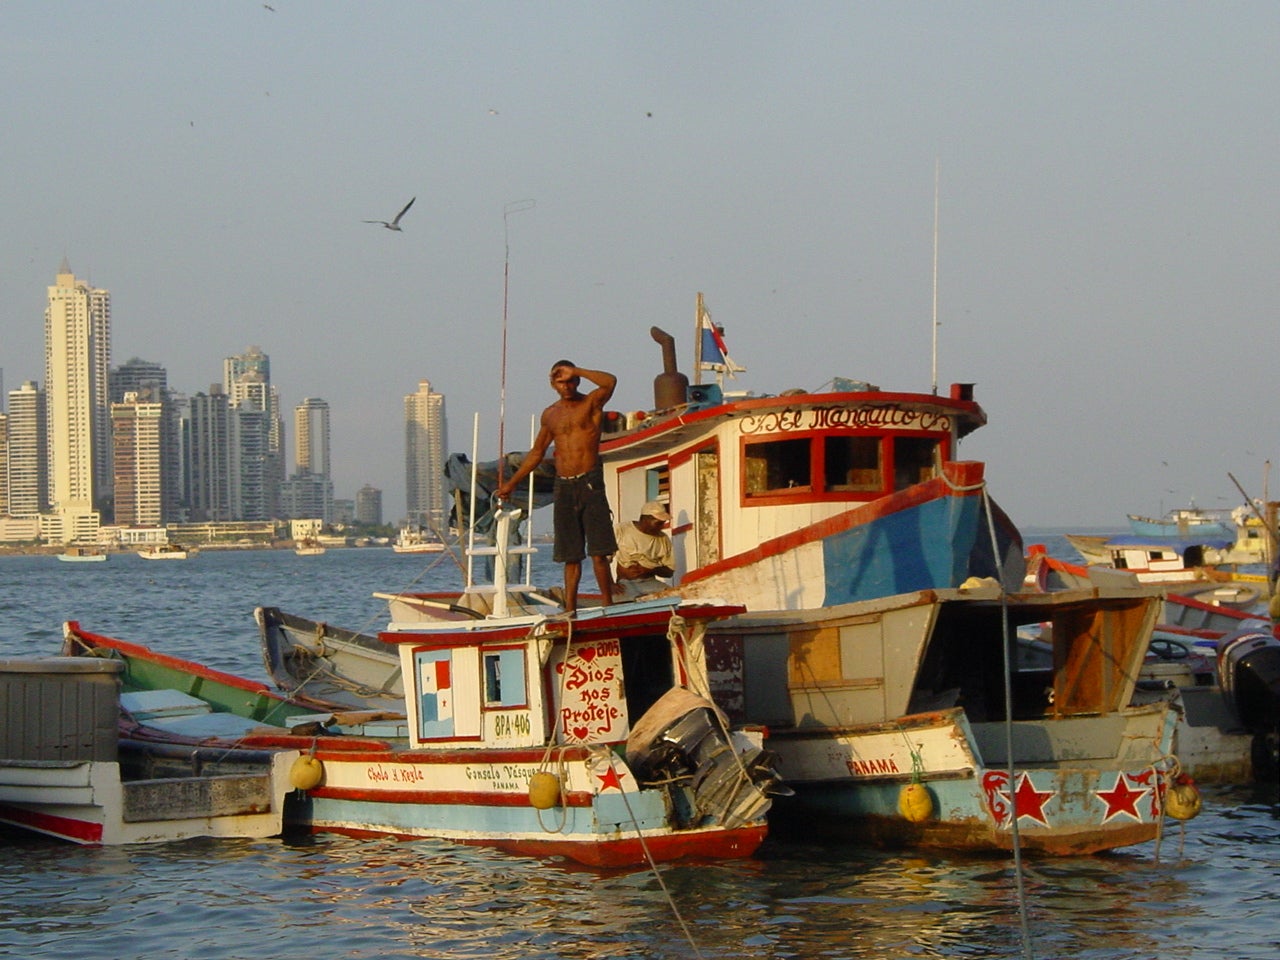 Panama City is one of the region's most alluring capitals